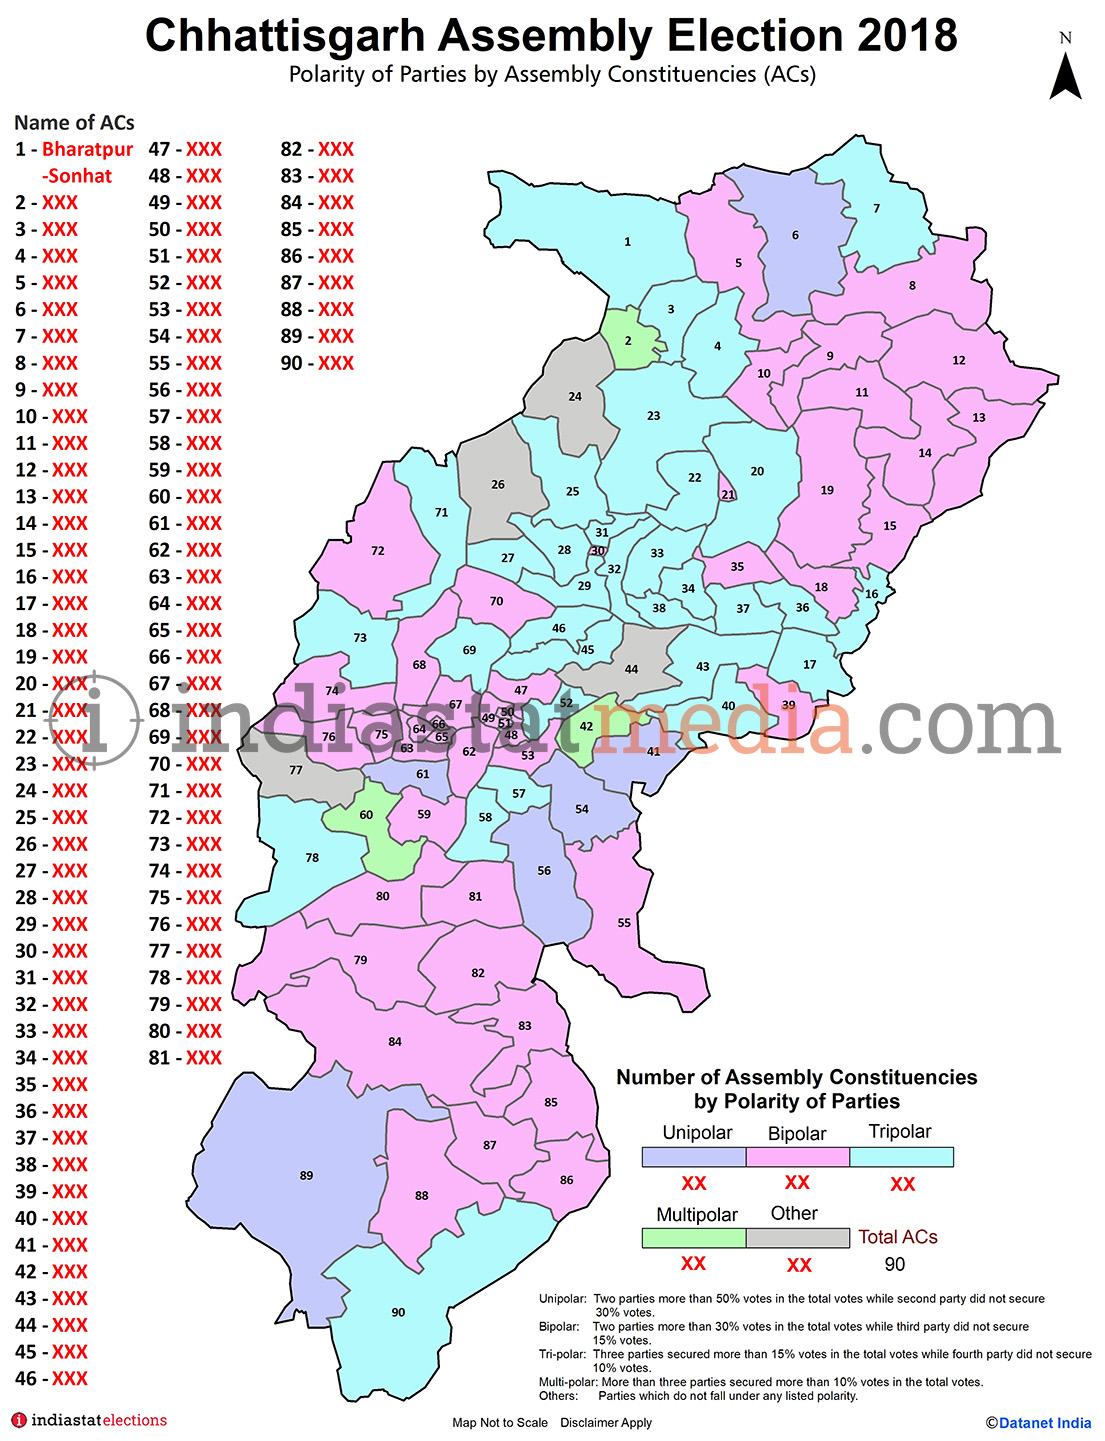 Polarity of Parties by Assembly Constituencies in Chhattisgarh (Assembly Election - 2018)